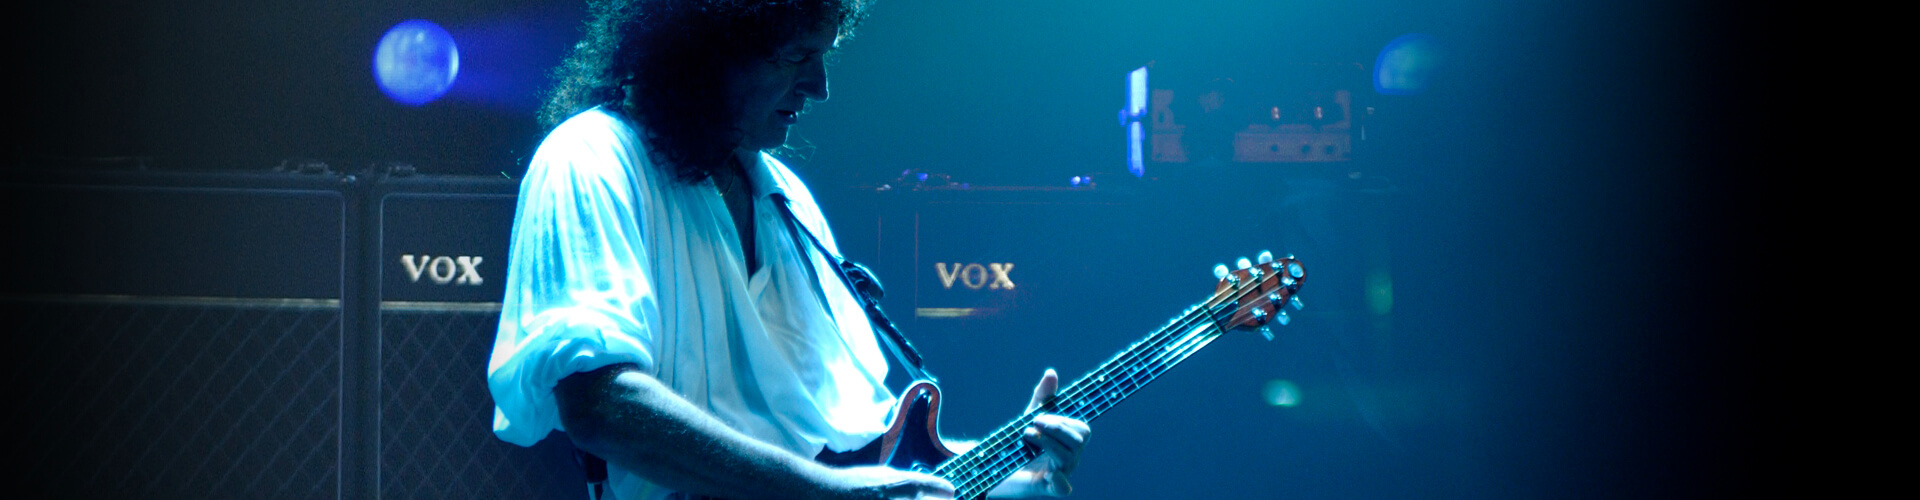 Brian May playing electric guitar in concert